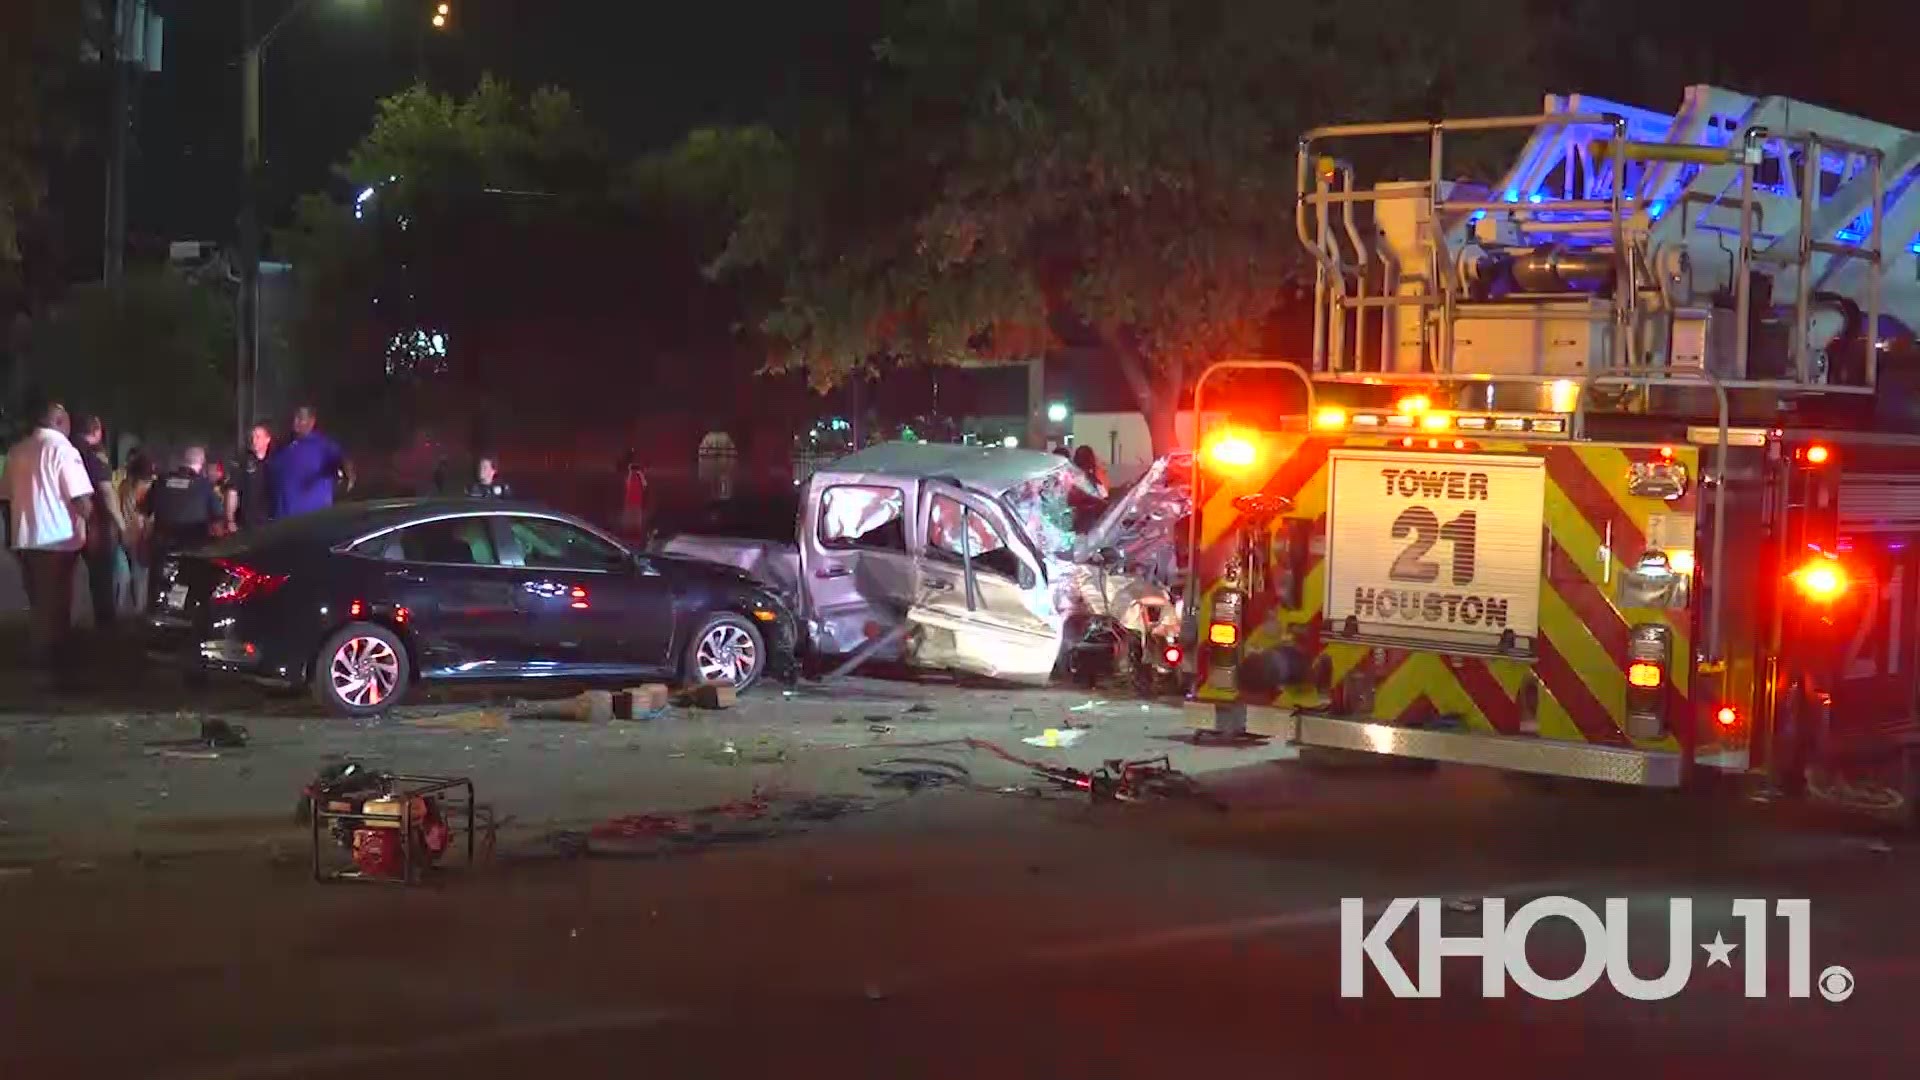 A good Samaritan was critically injured after getting pinned under a pickup truck in southwest Houston early Sunday, firefighters said. The incident happened in the 9900 block of South Main near the 610 South Loop at about 4 a.m., according to the Houston Fire Department.